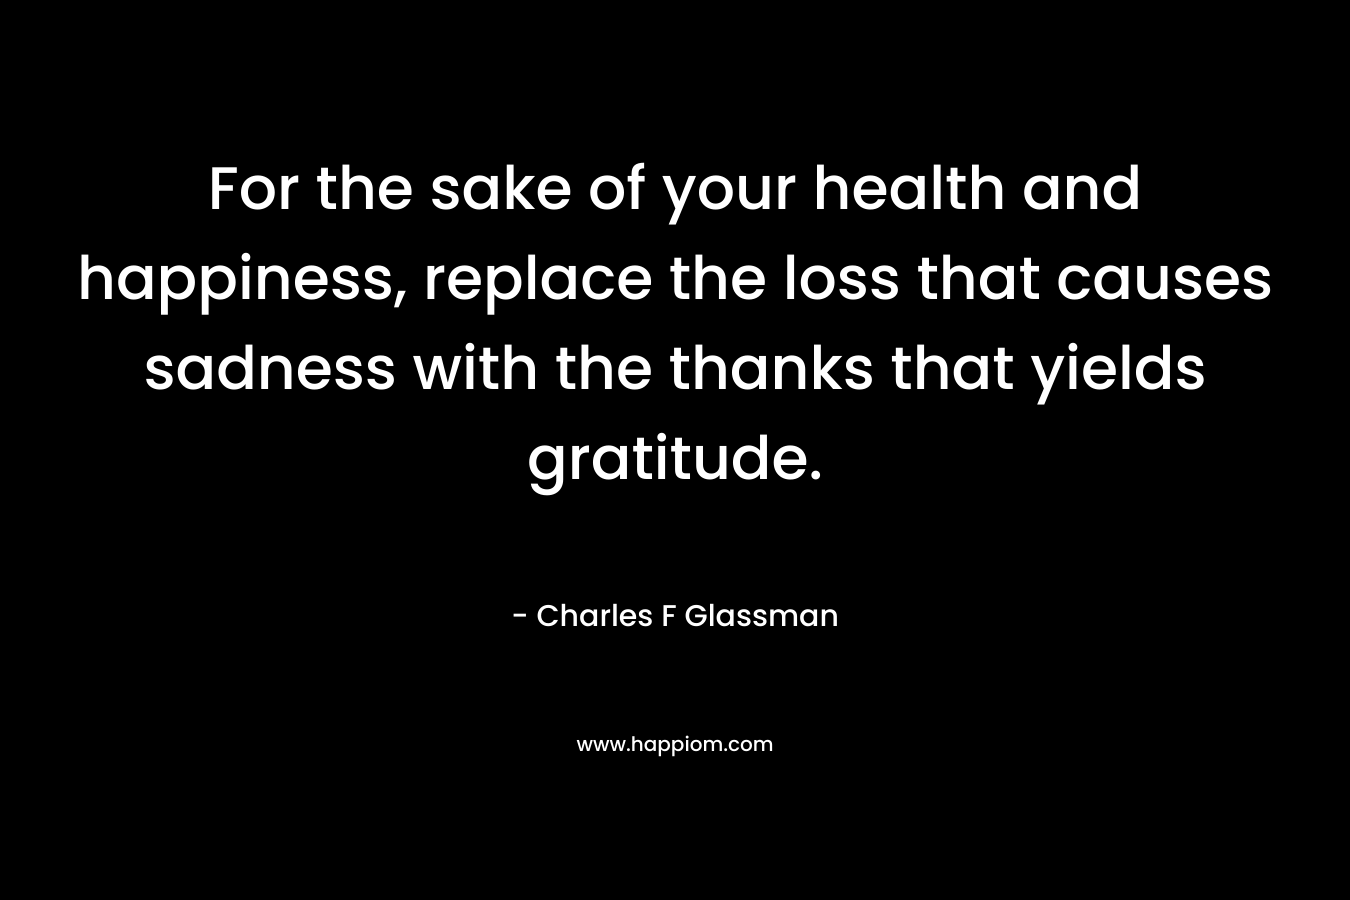 For the sake of your health and happiness, replace the loss that causes sadness with the thanks that yields gratitude. – Charles F Glassman